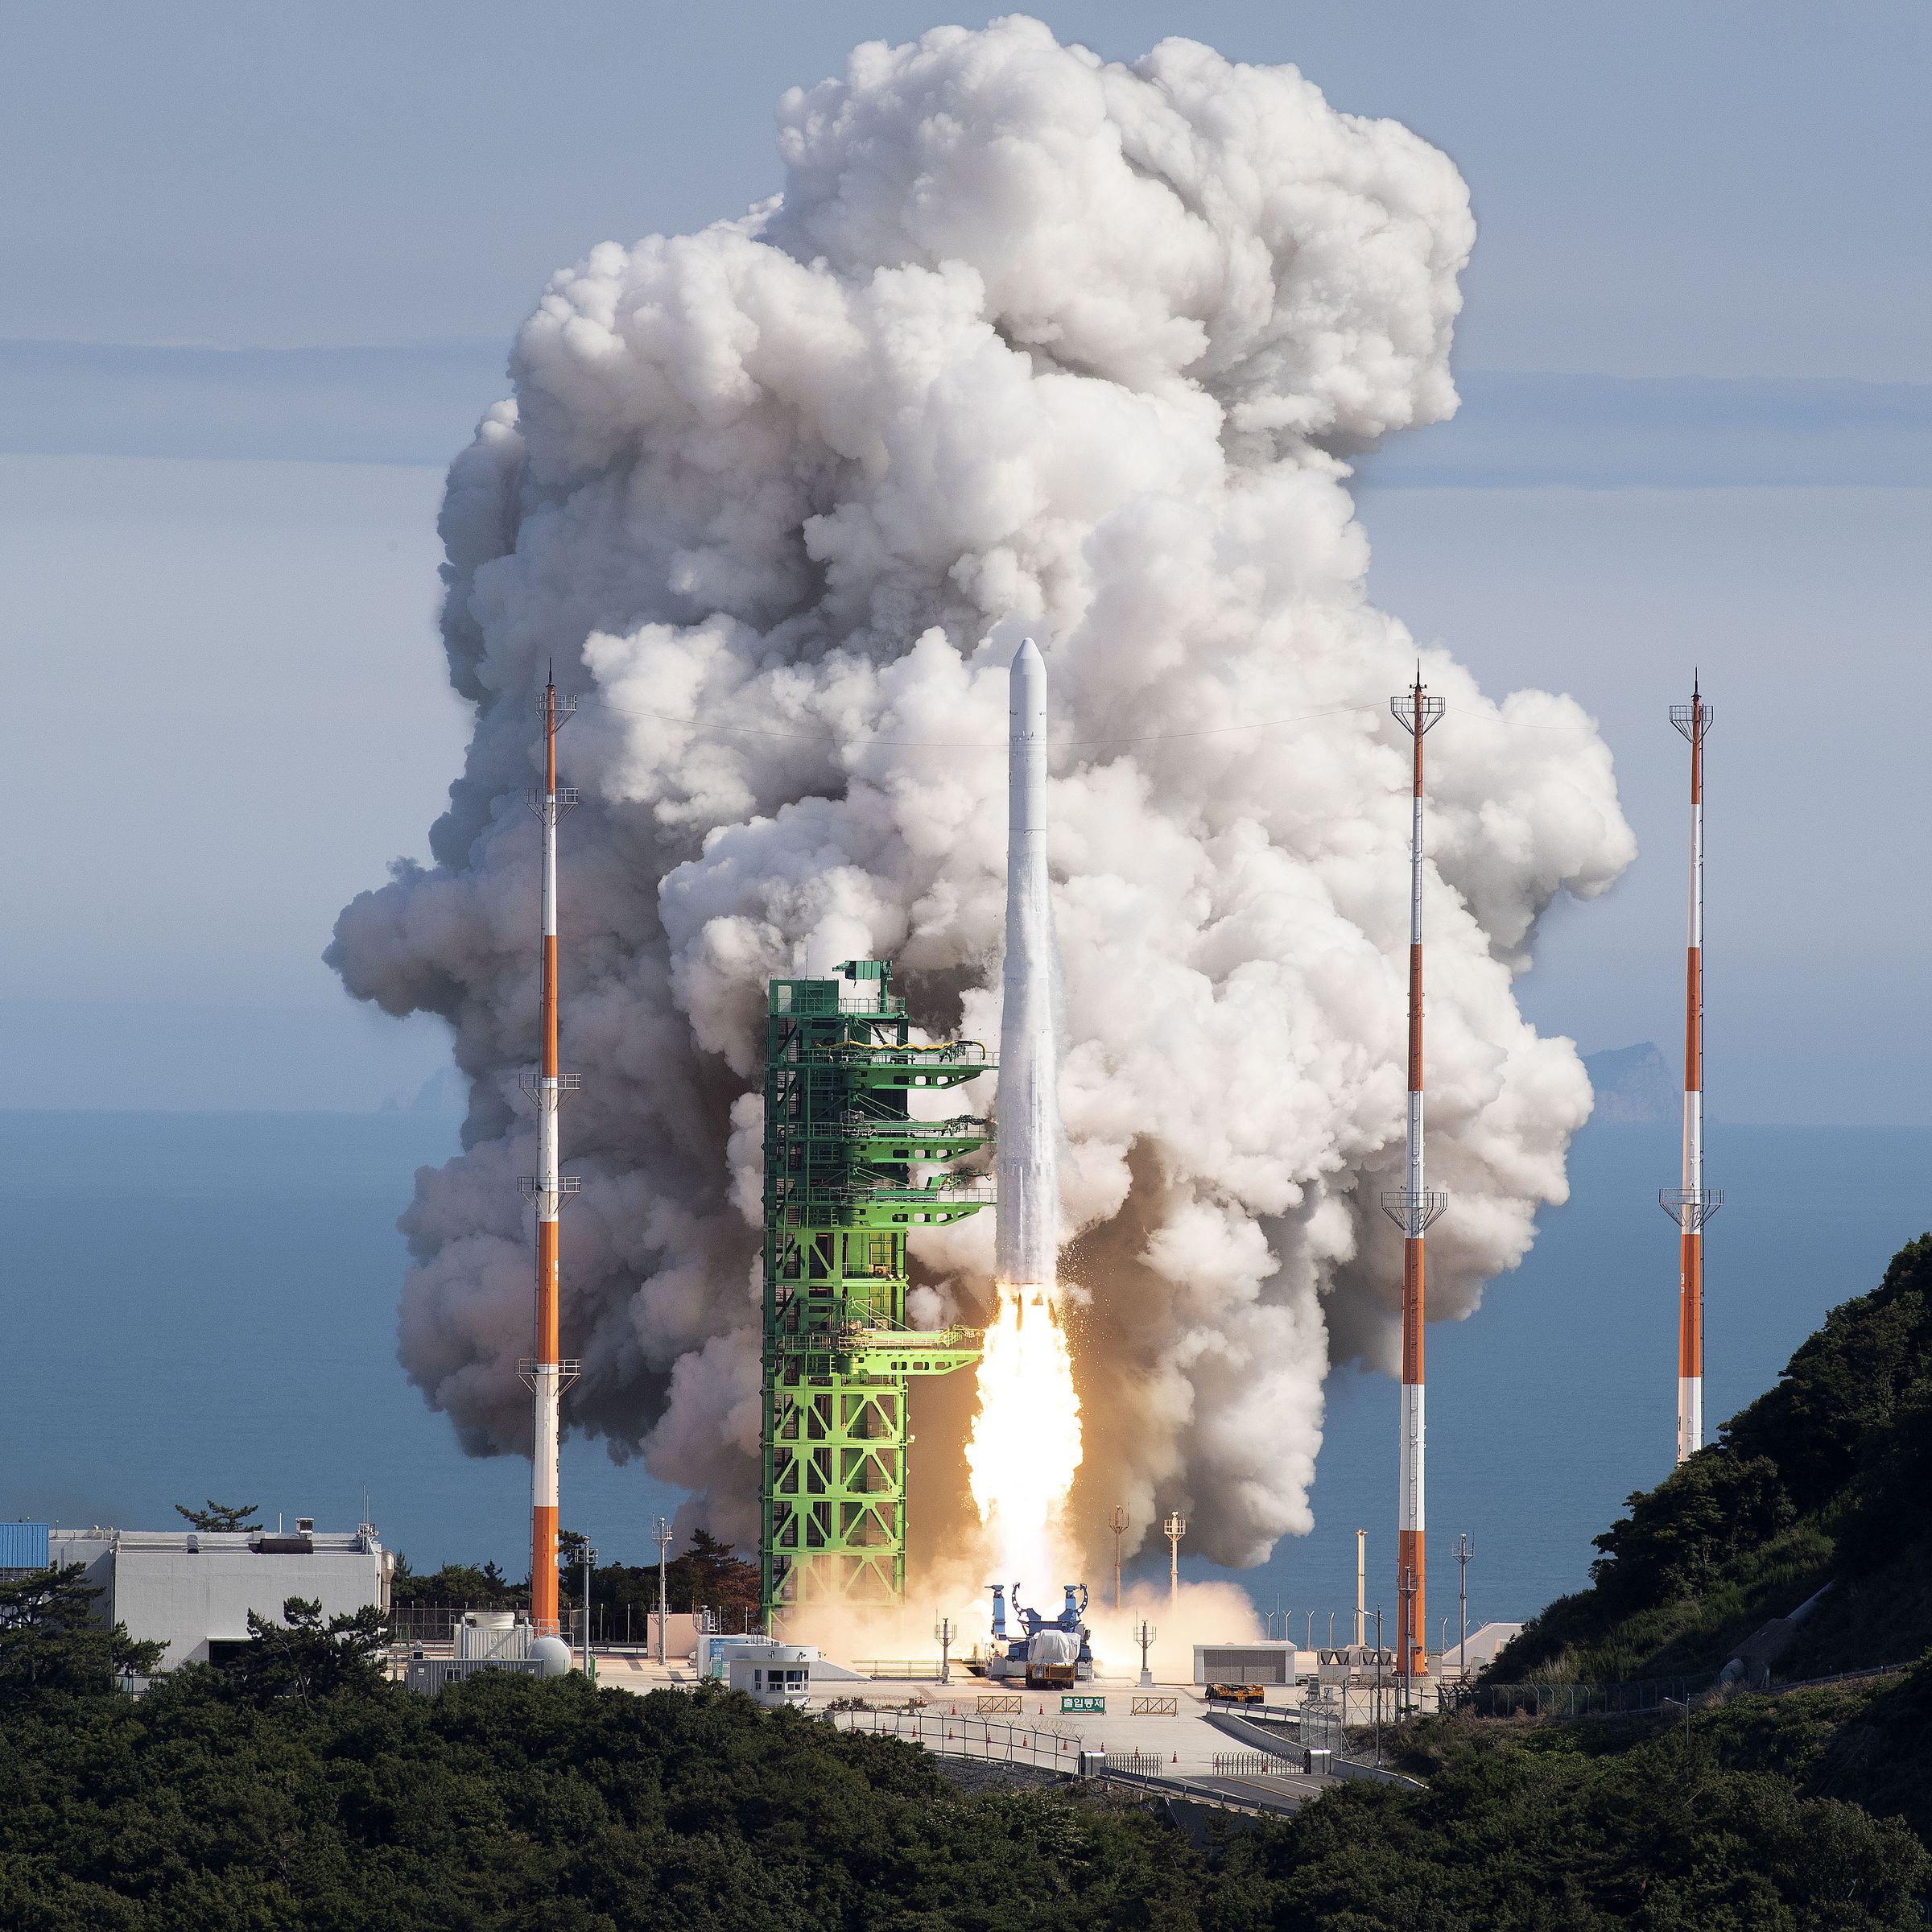 Space rocket Nuri (KSLV-Ⅱ) taking off from its launch pad at the Naro Space Center on June 21, 2022.